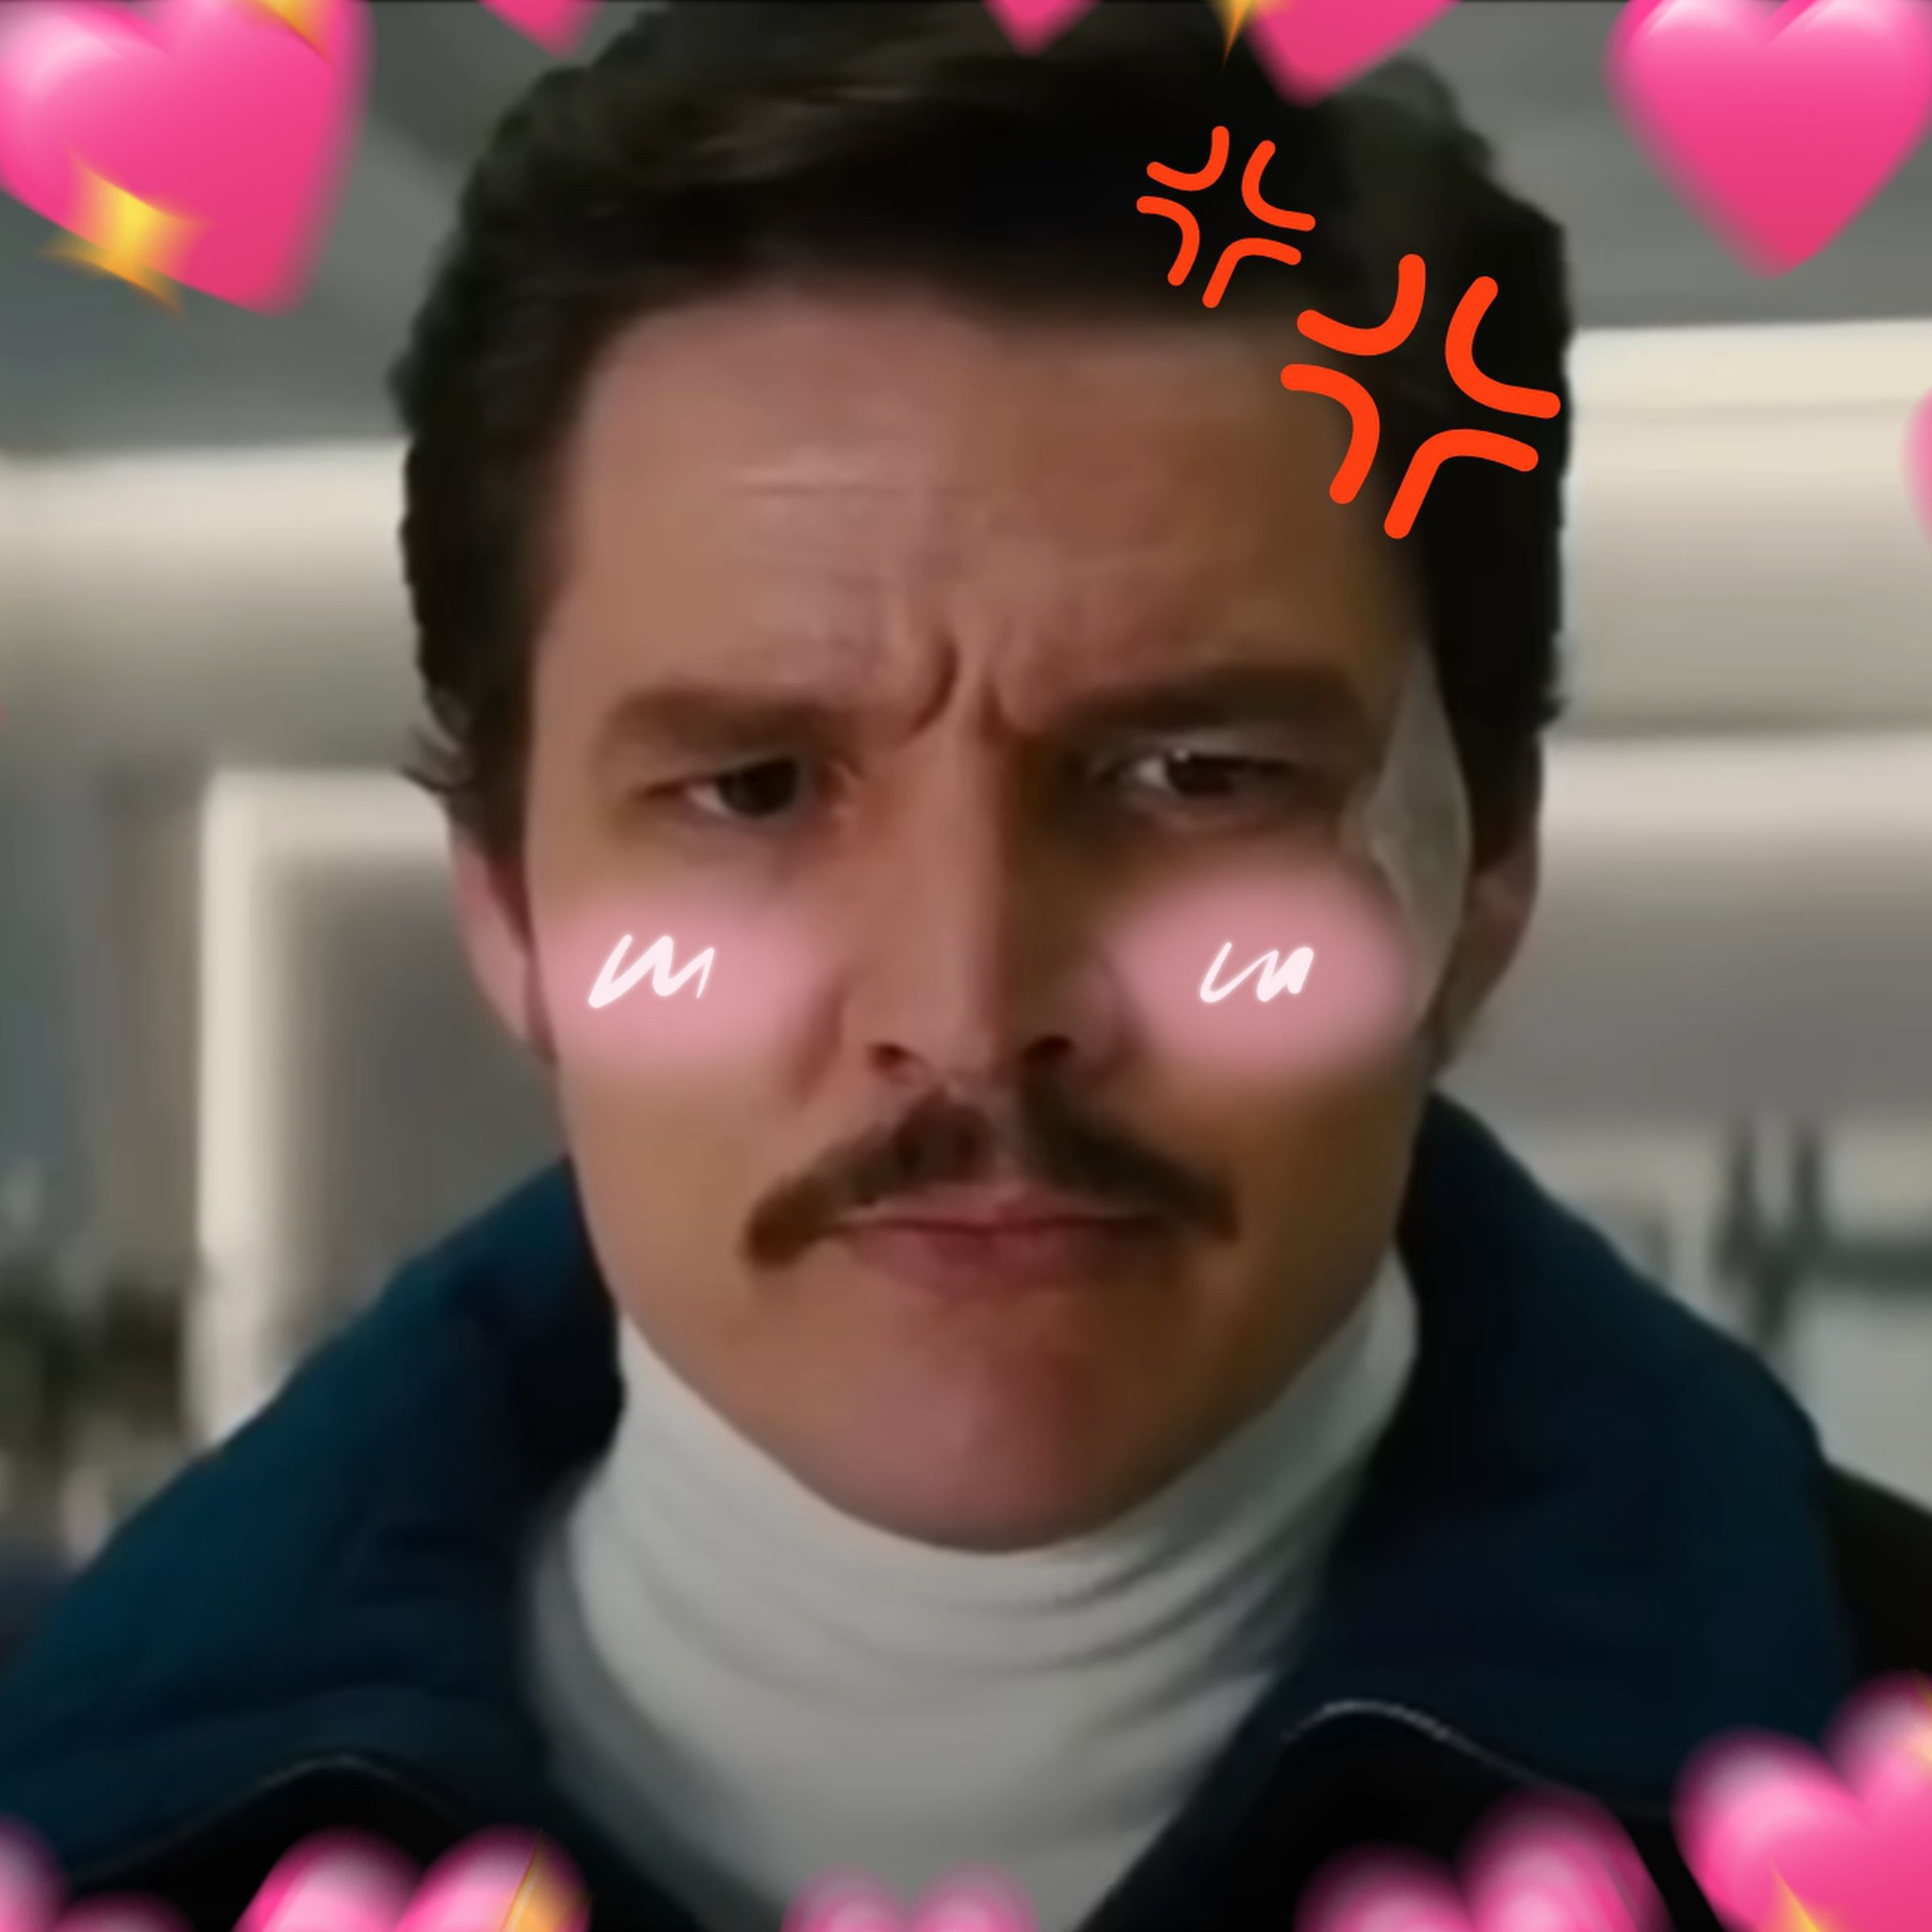 A screenshot of Pedro Pascal taken from Kingsman: The Golden Circle, edited to resemble a fandom reaction image.